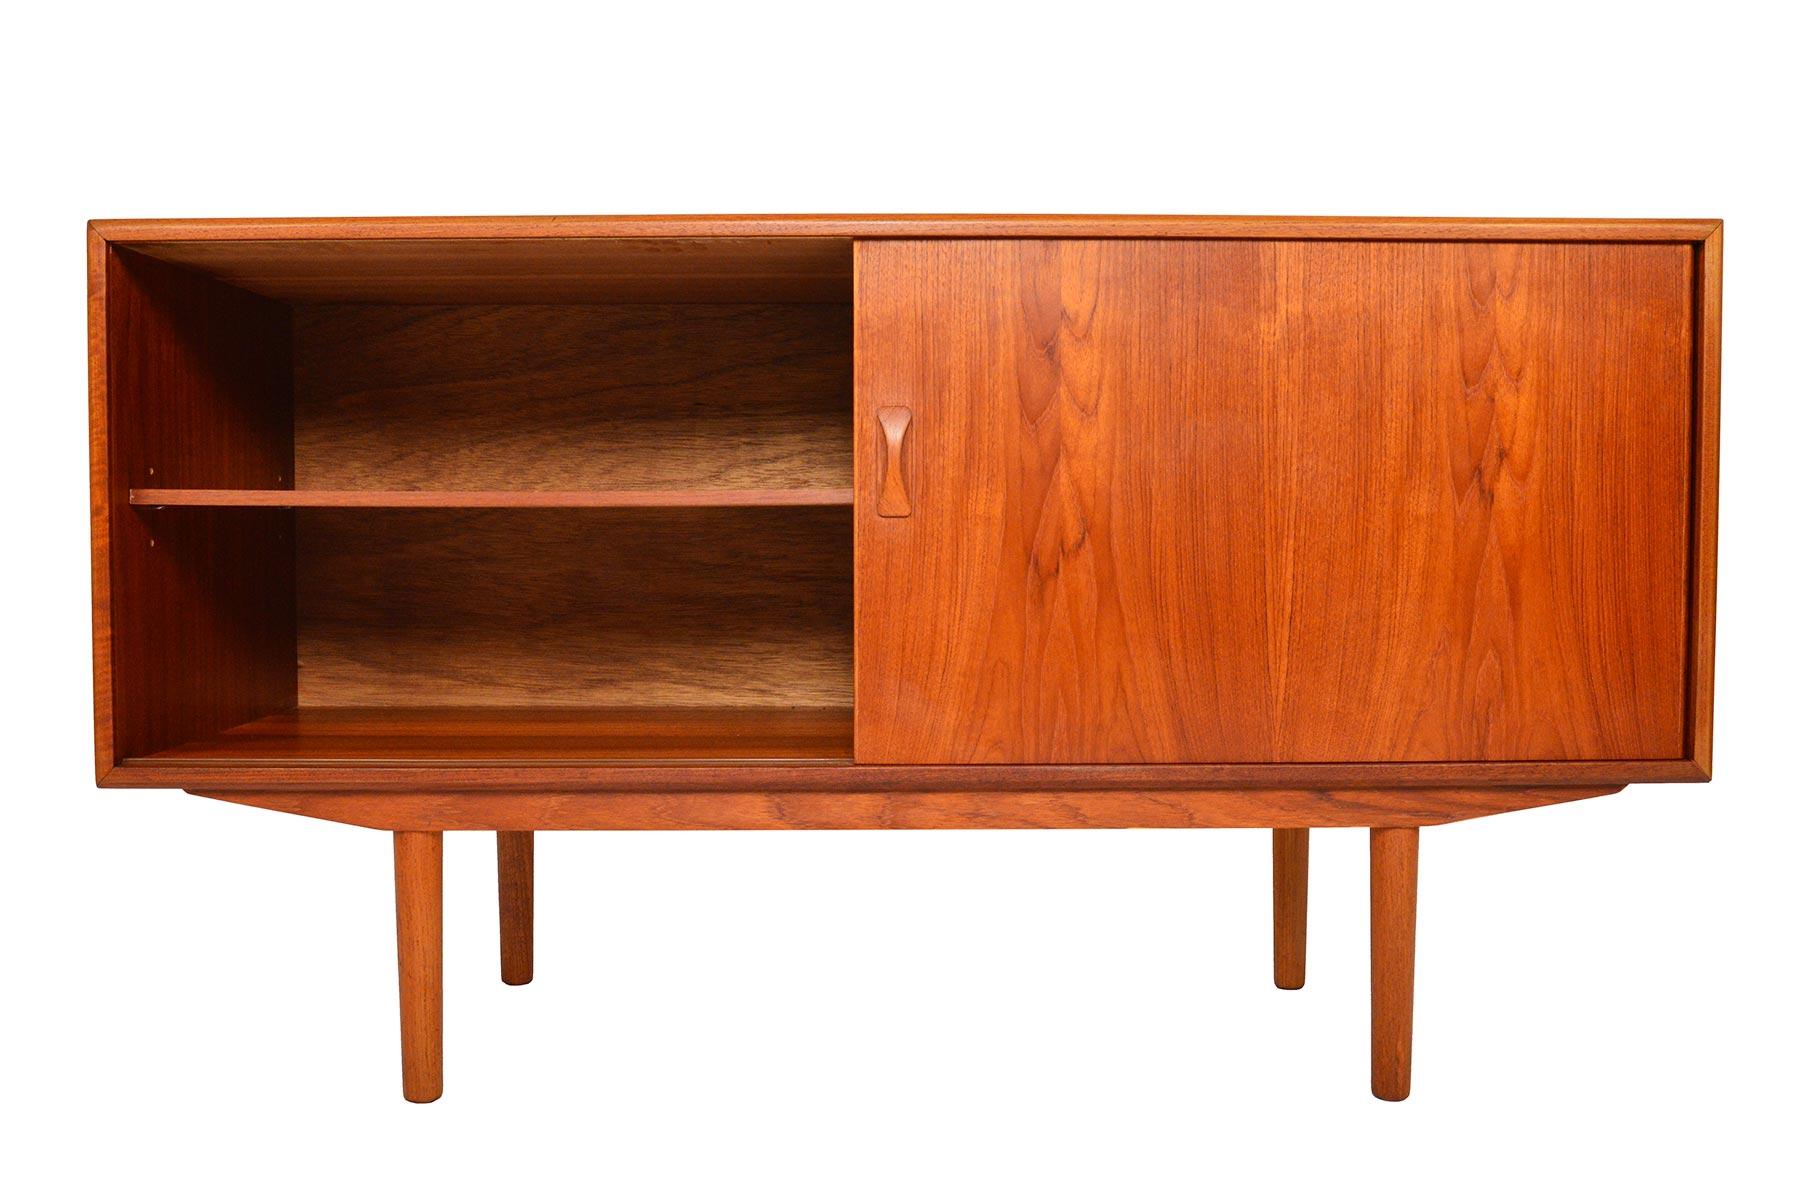 Efficiently compact, this Danish modern teak credenza was manufactured by Clausen and Søn in the 1960s. A large sliding door opens to reveal a single bay with an adjustable shelf. Four drawers with complimentary pulls sit to the right for additional